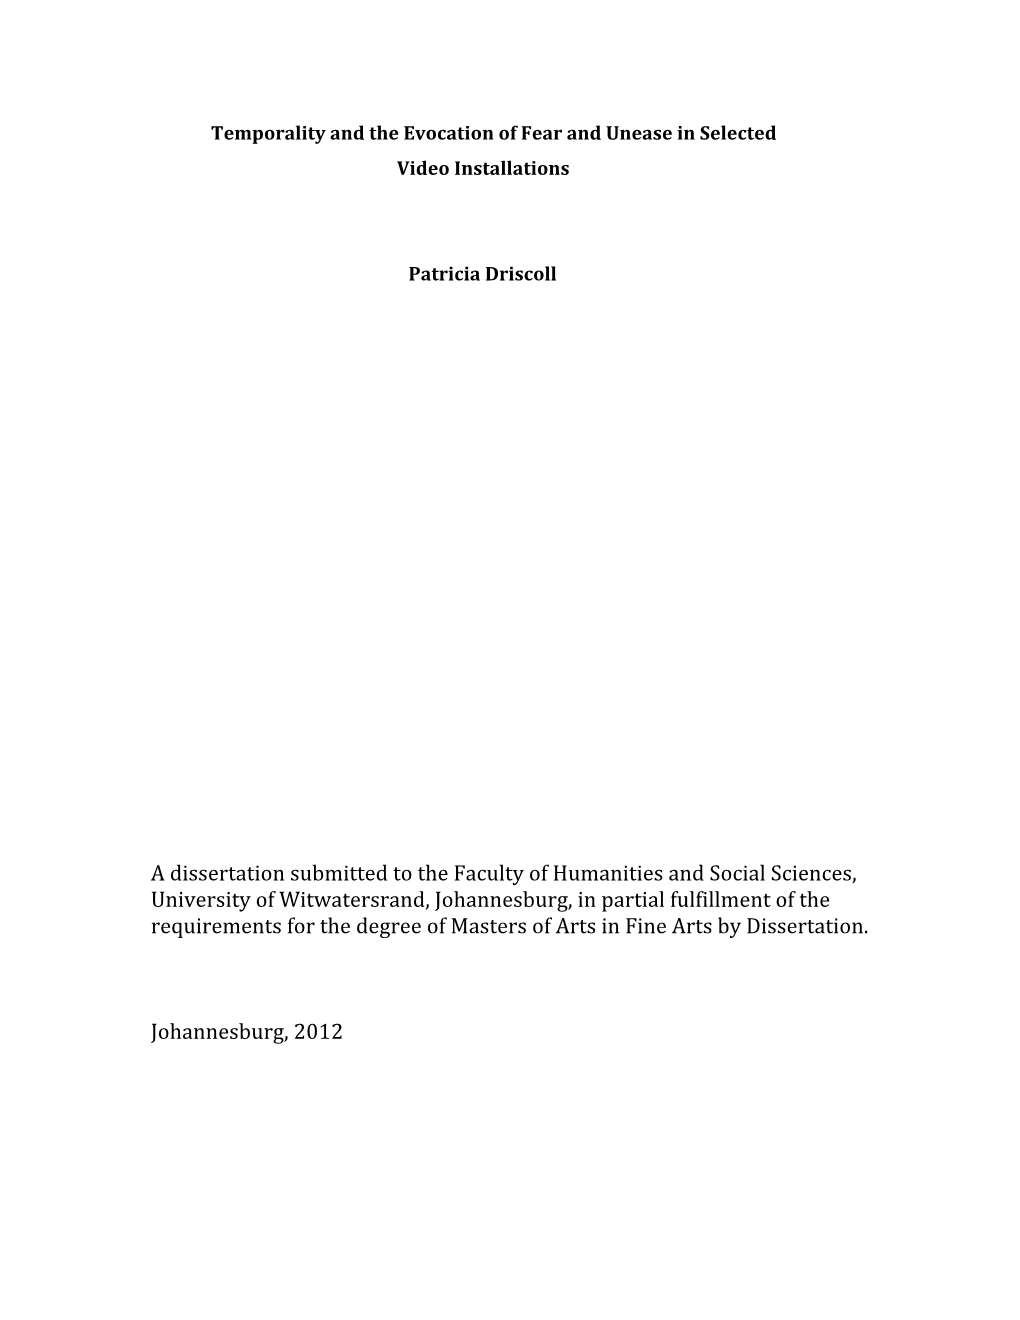 A Dissertation Submitted to the Faculty of Humanities And